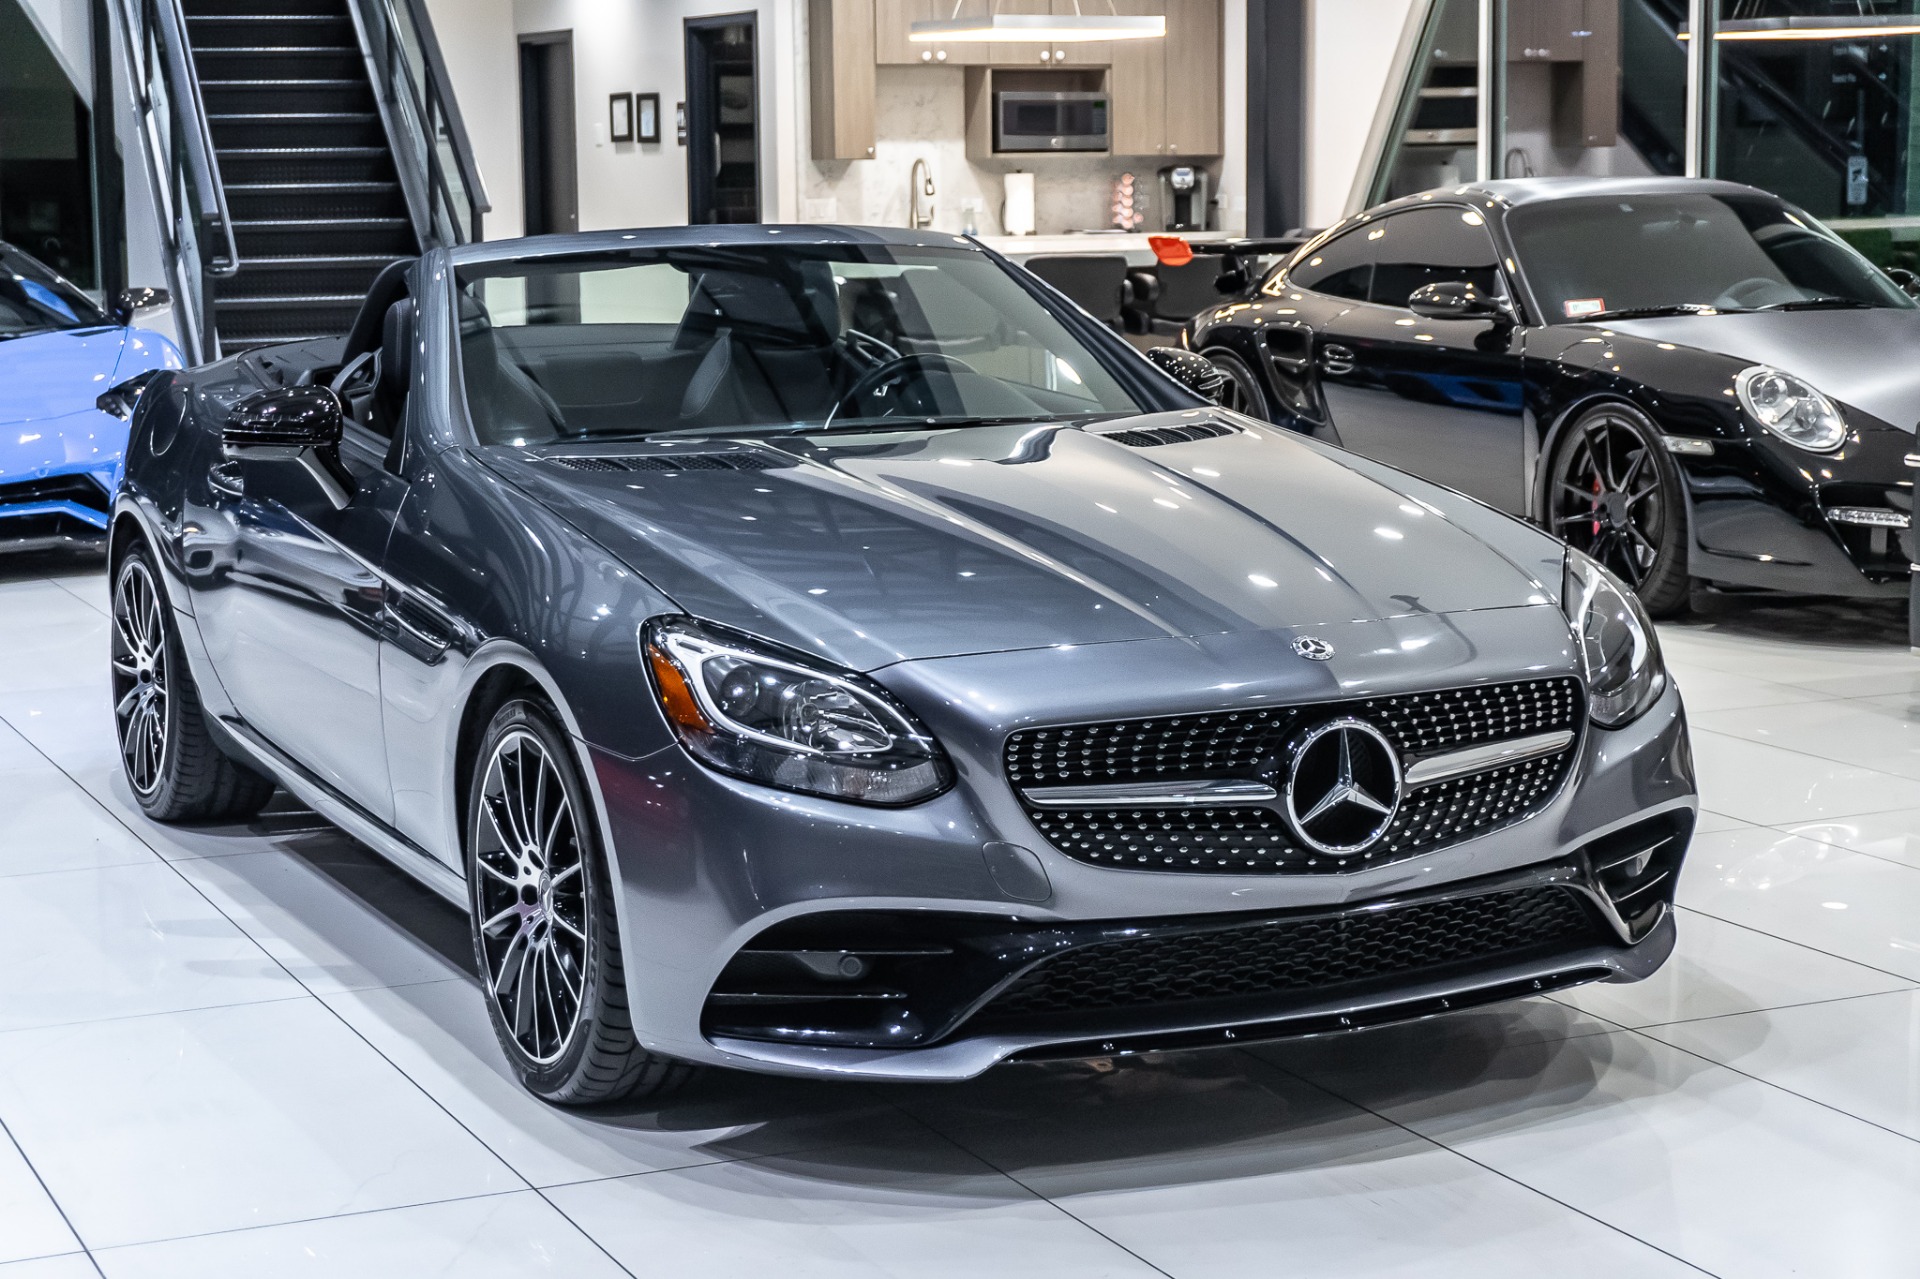 Used-2018-Mercedes-Benz-SLC-300-Roadster-PREMIUM-1-PACKAGE. 